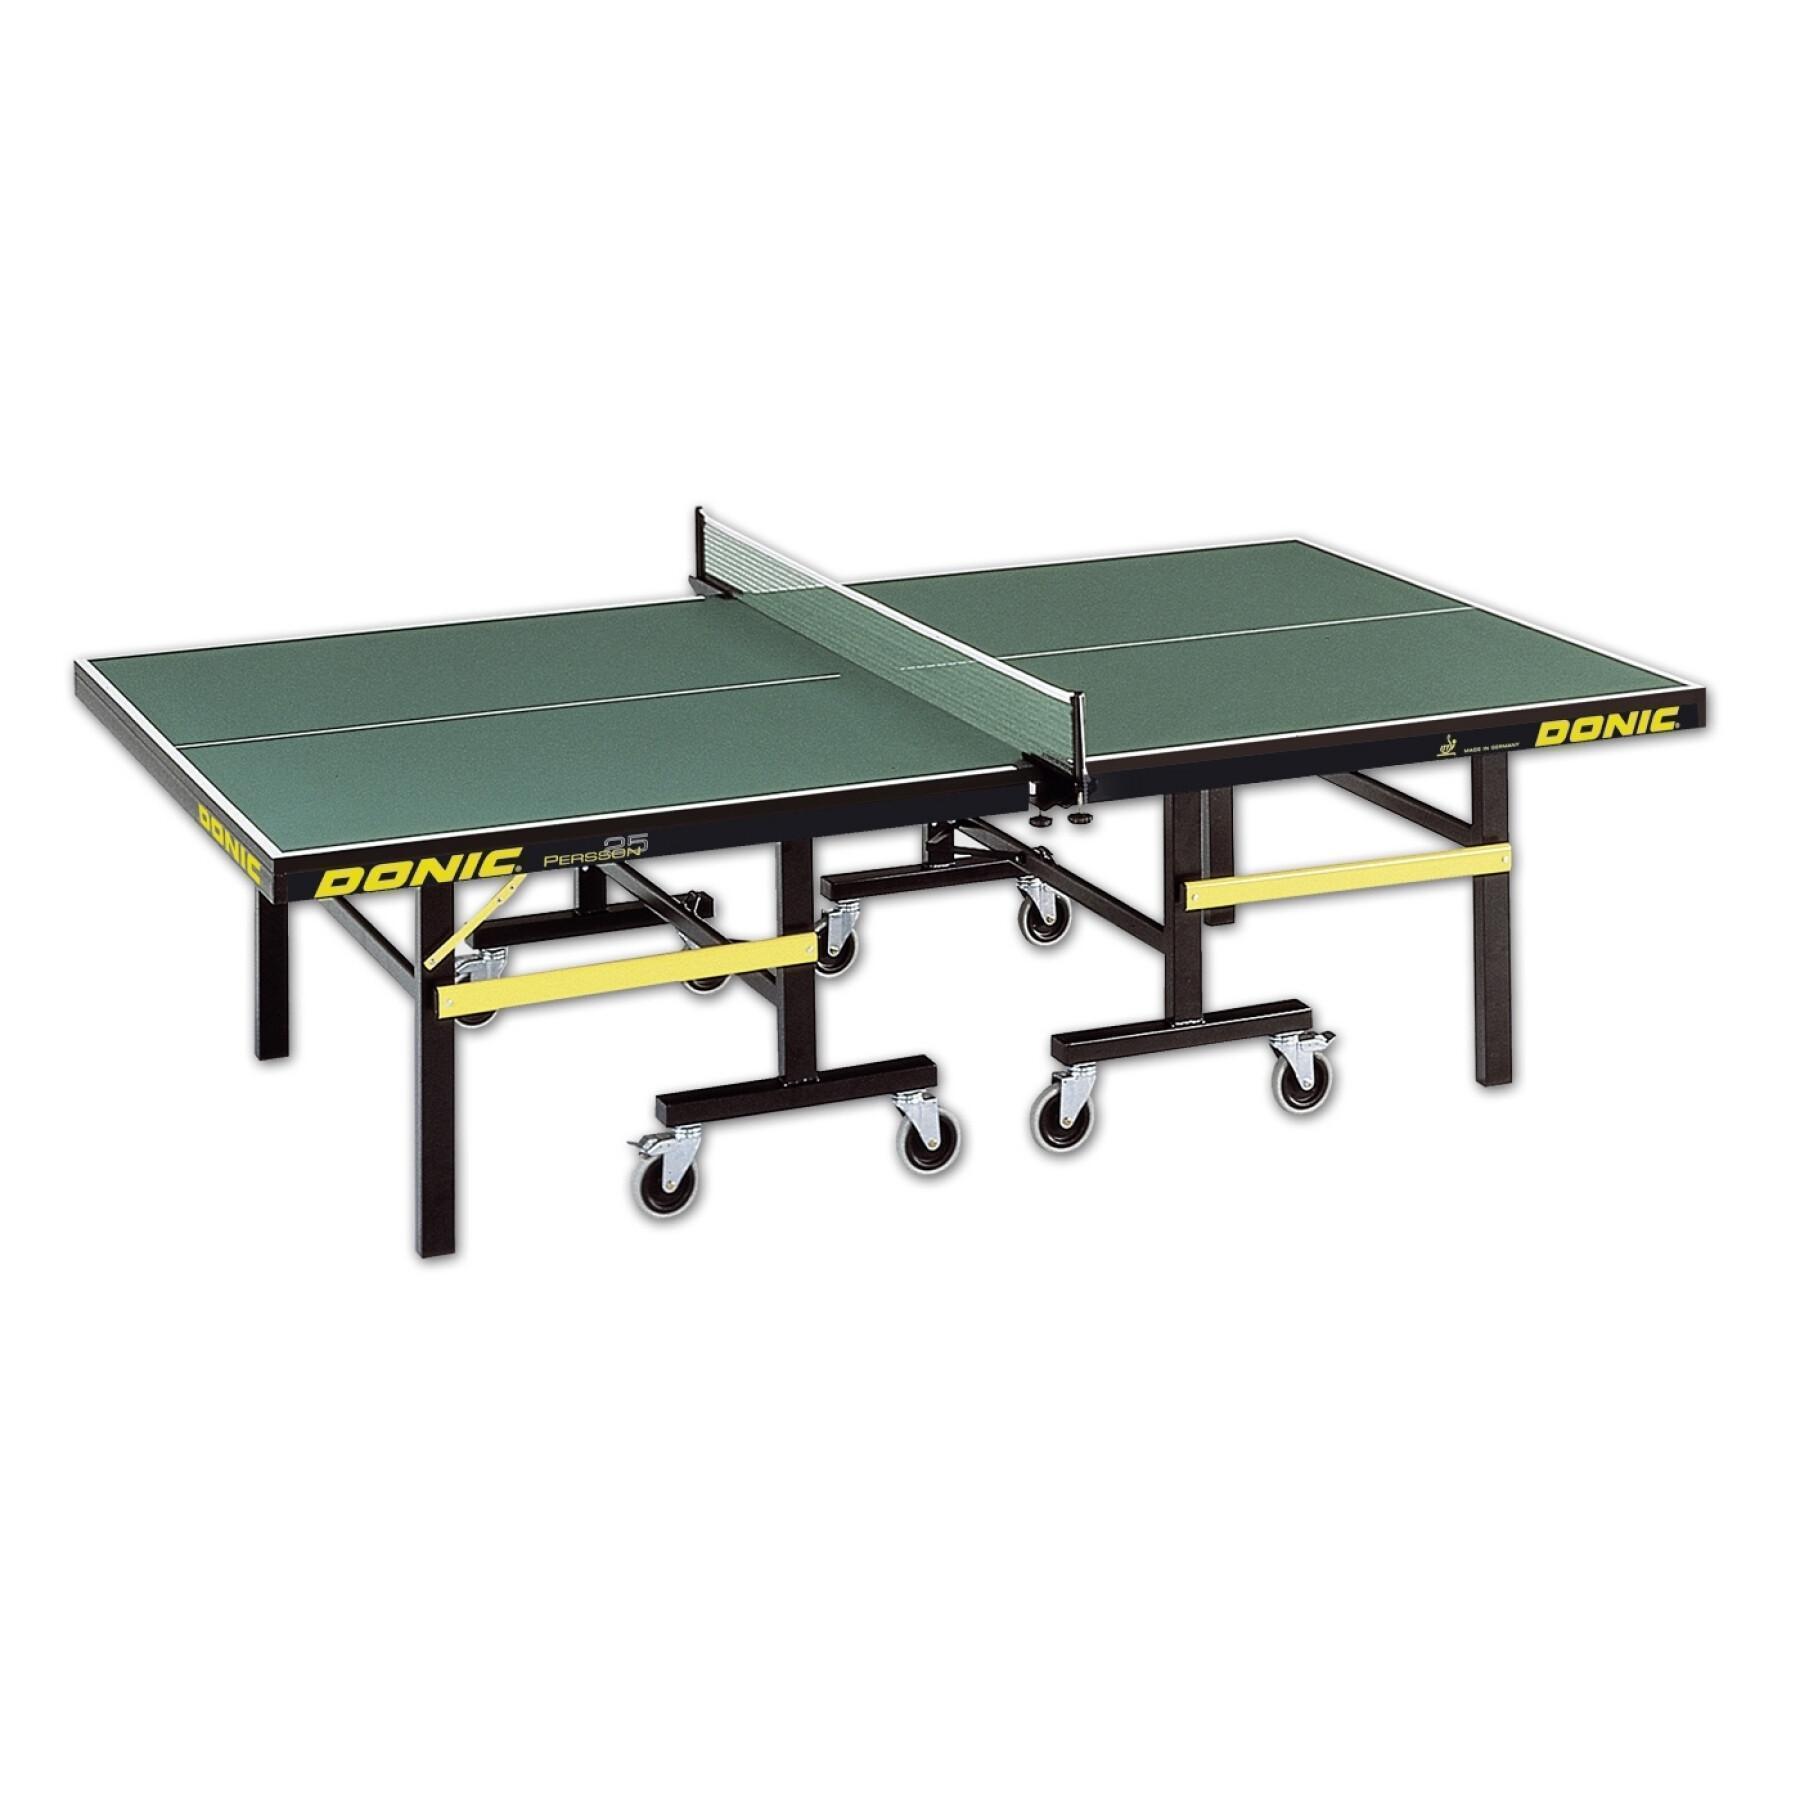 Table tennis de table Donic Persson 25